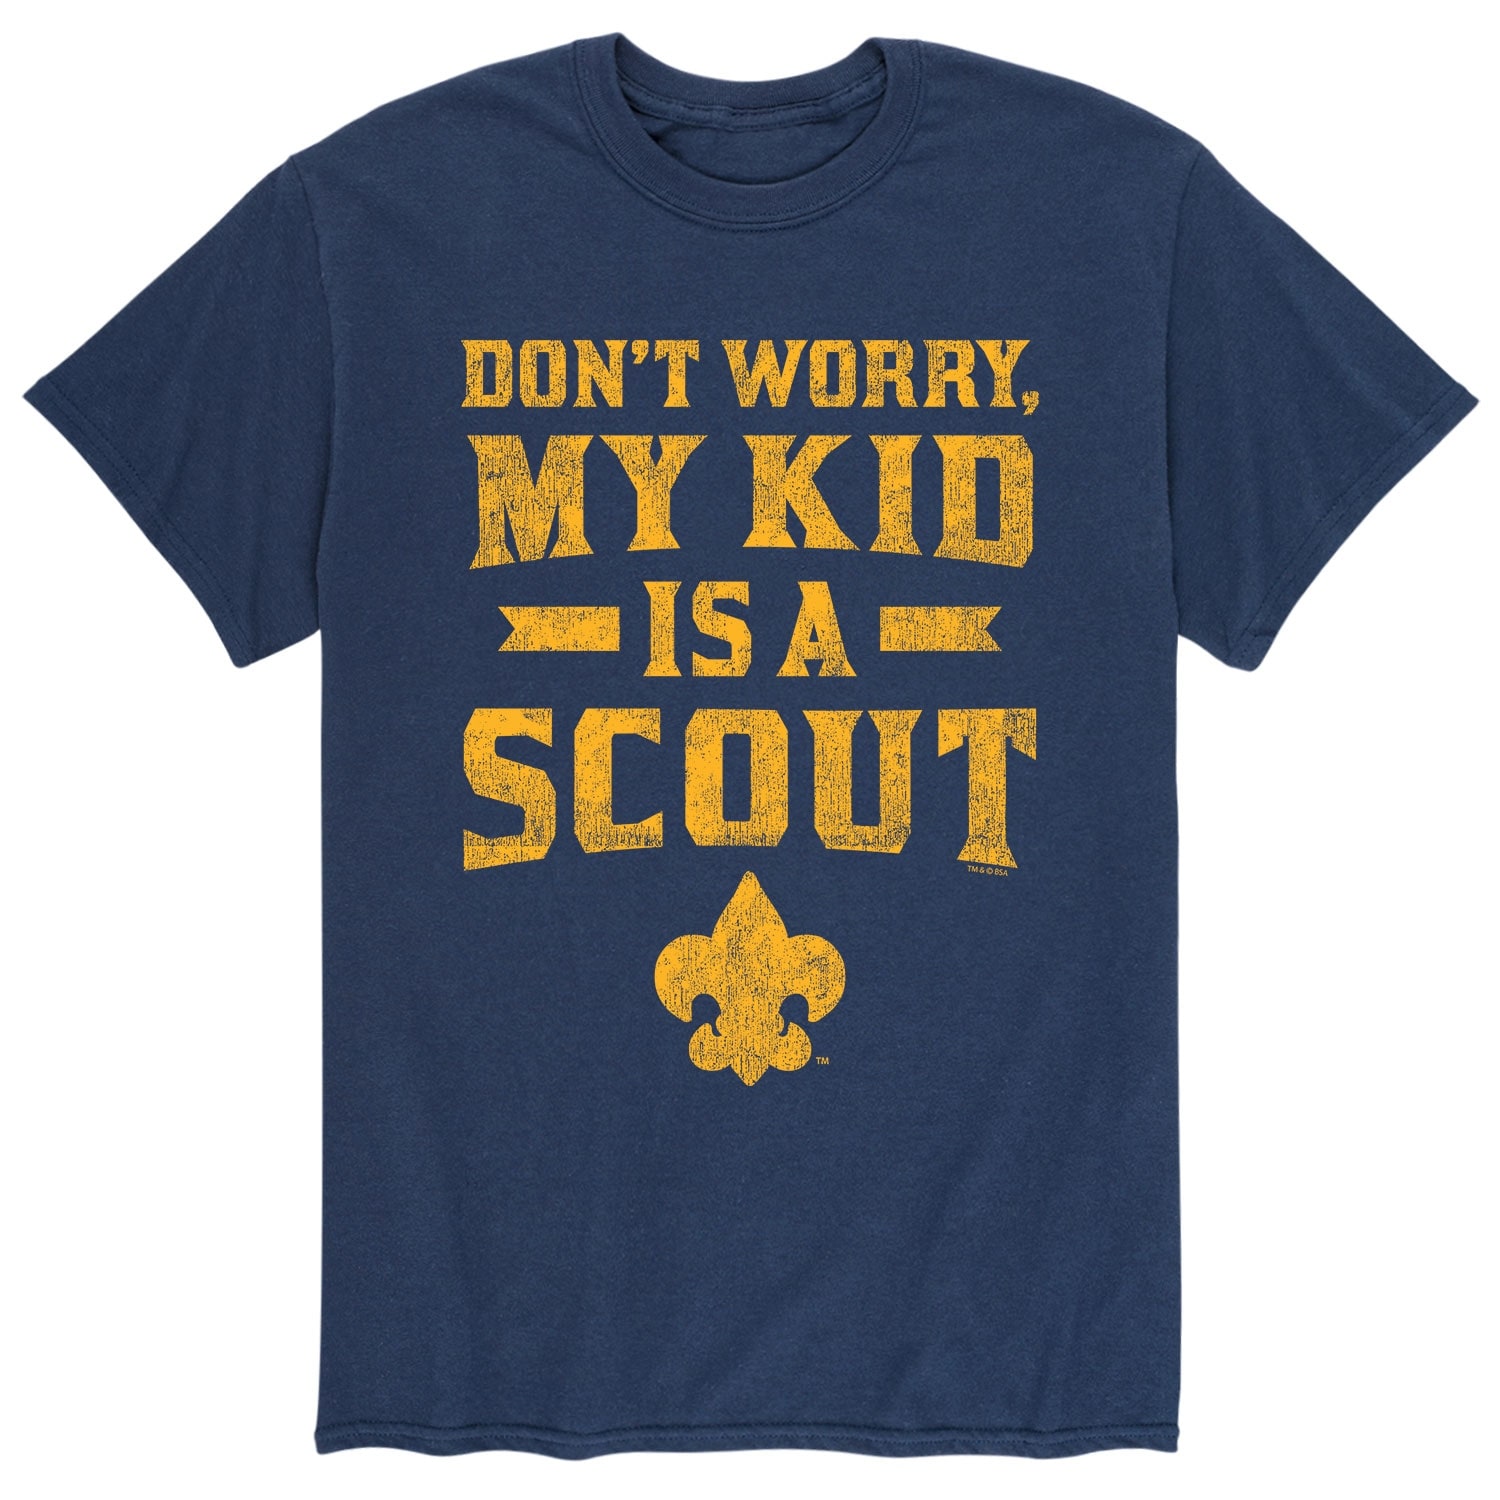 Boy Scouts of America My Kid A Scout - Adult Short Sleeve Tee